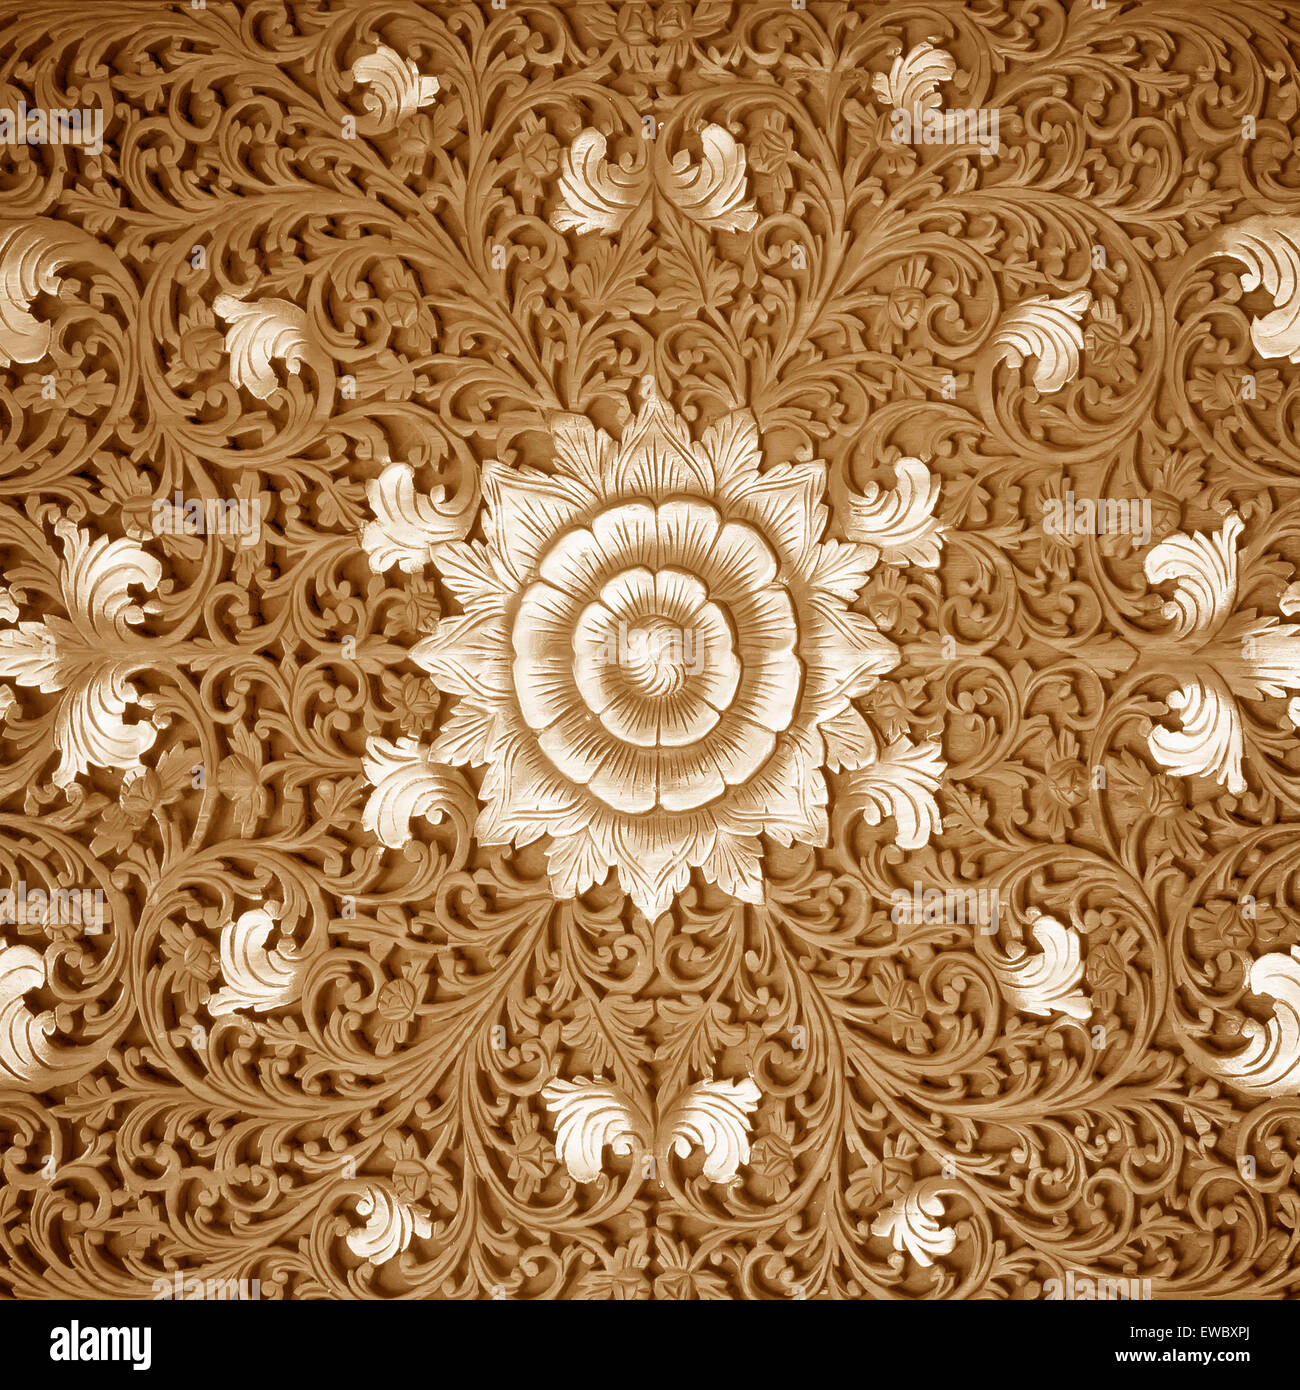 Wood carving brown floral pattern background texture Stock Photo - Alamy